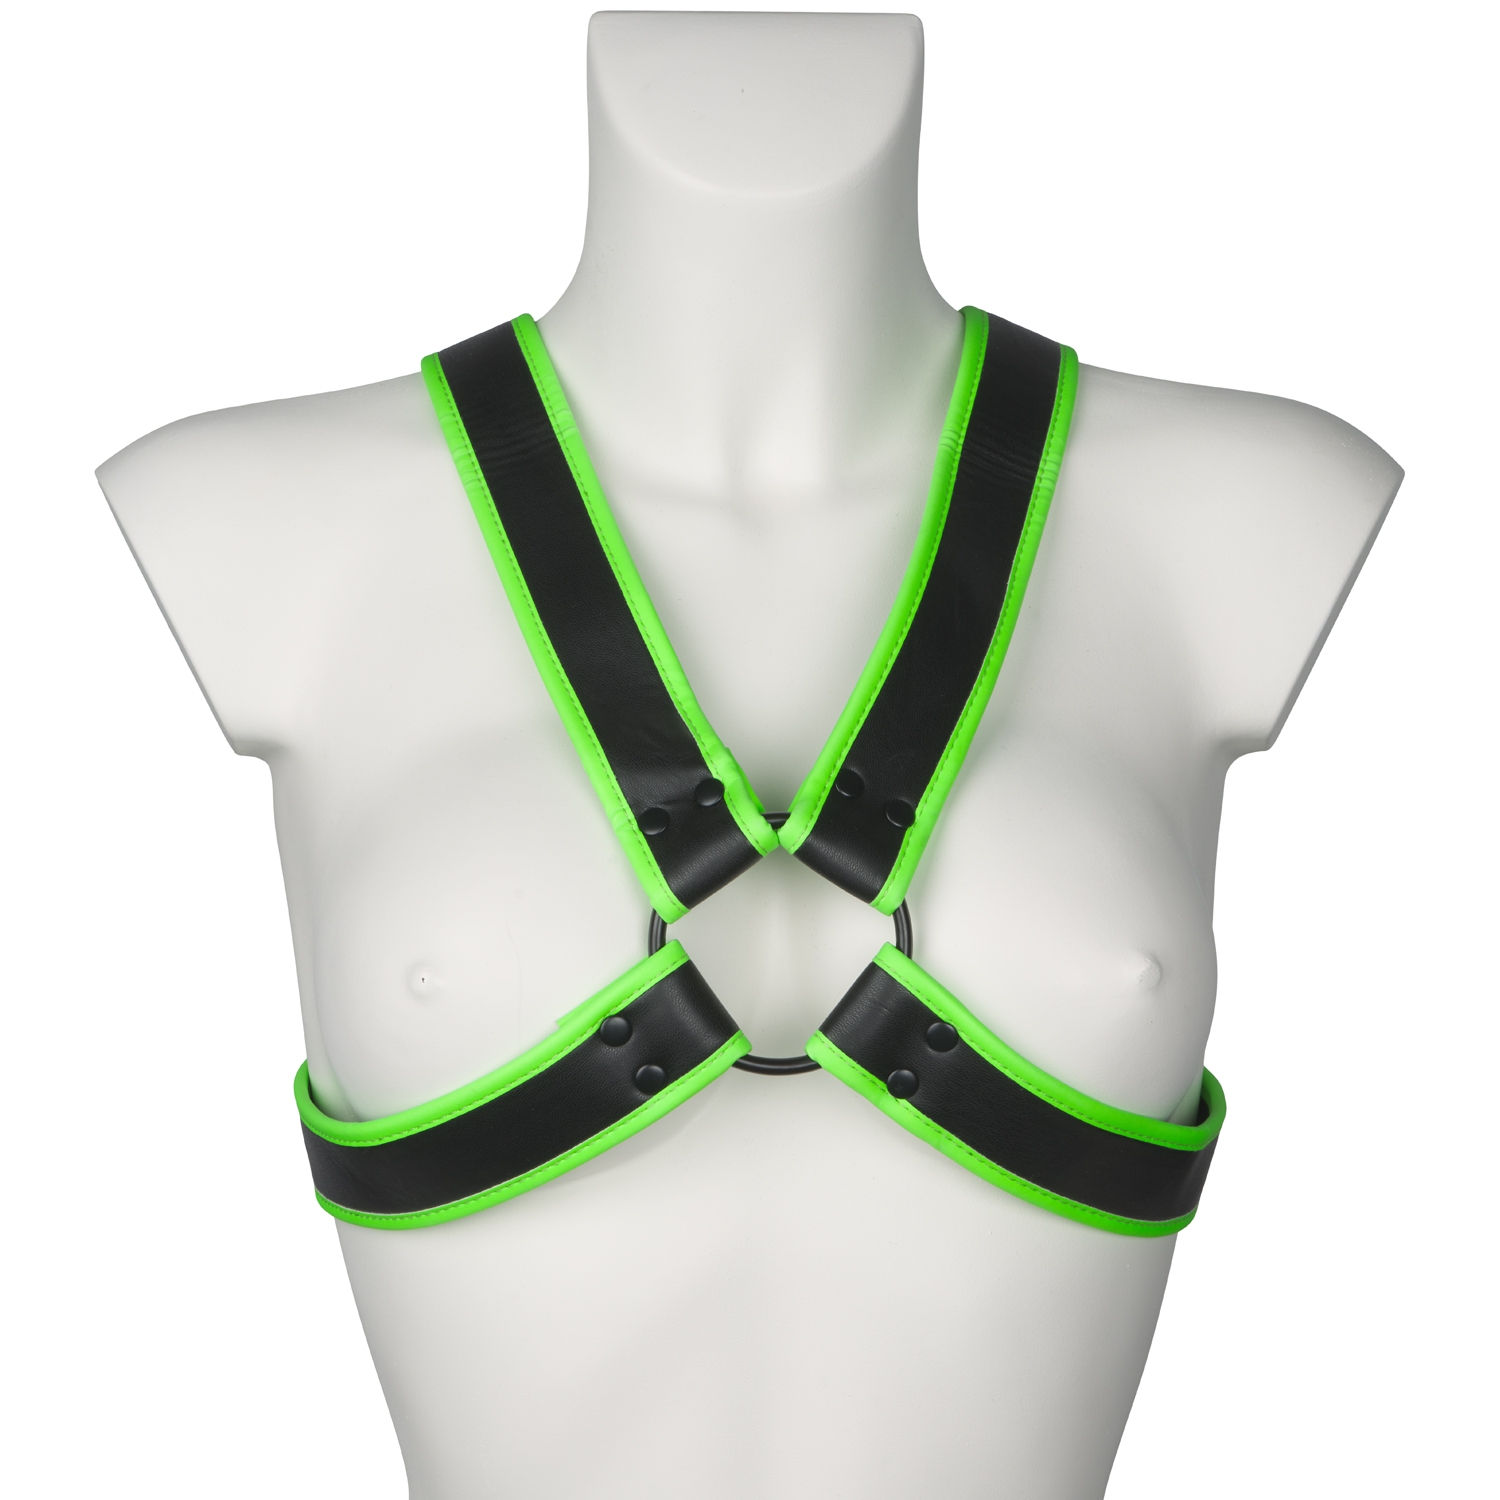 Ouch! Glow in the Dark Cross Bryst Harness - Black - S/M